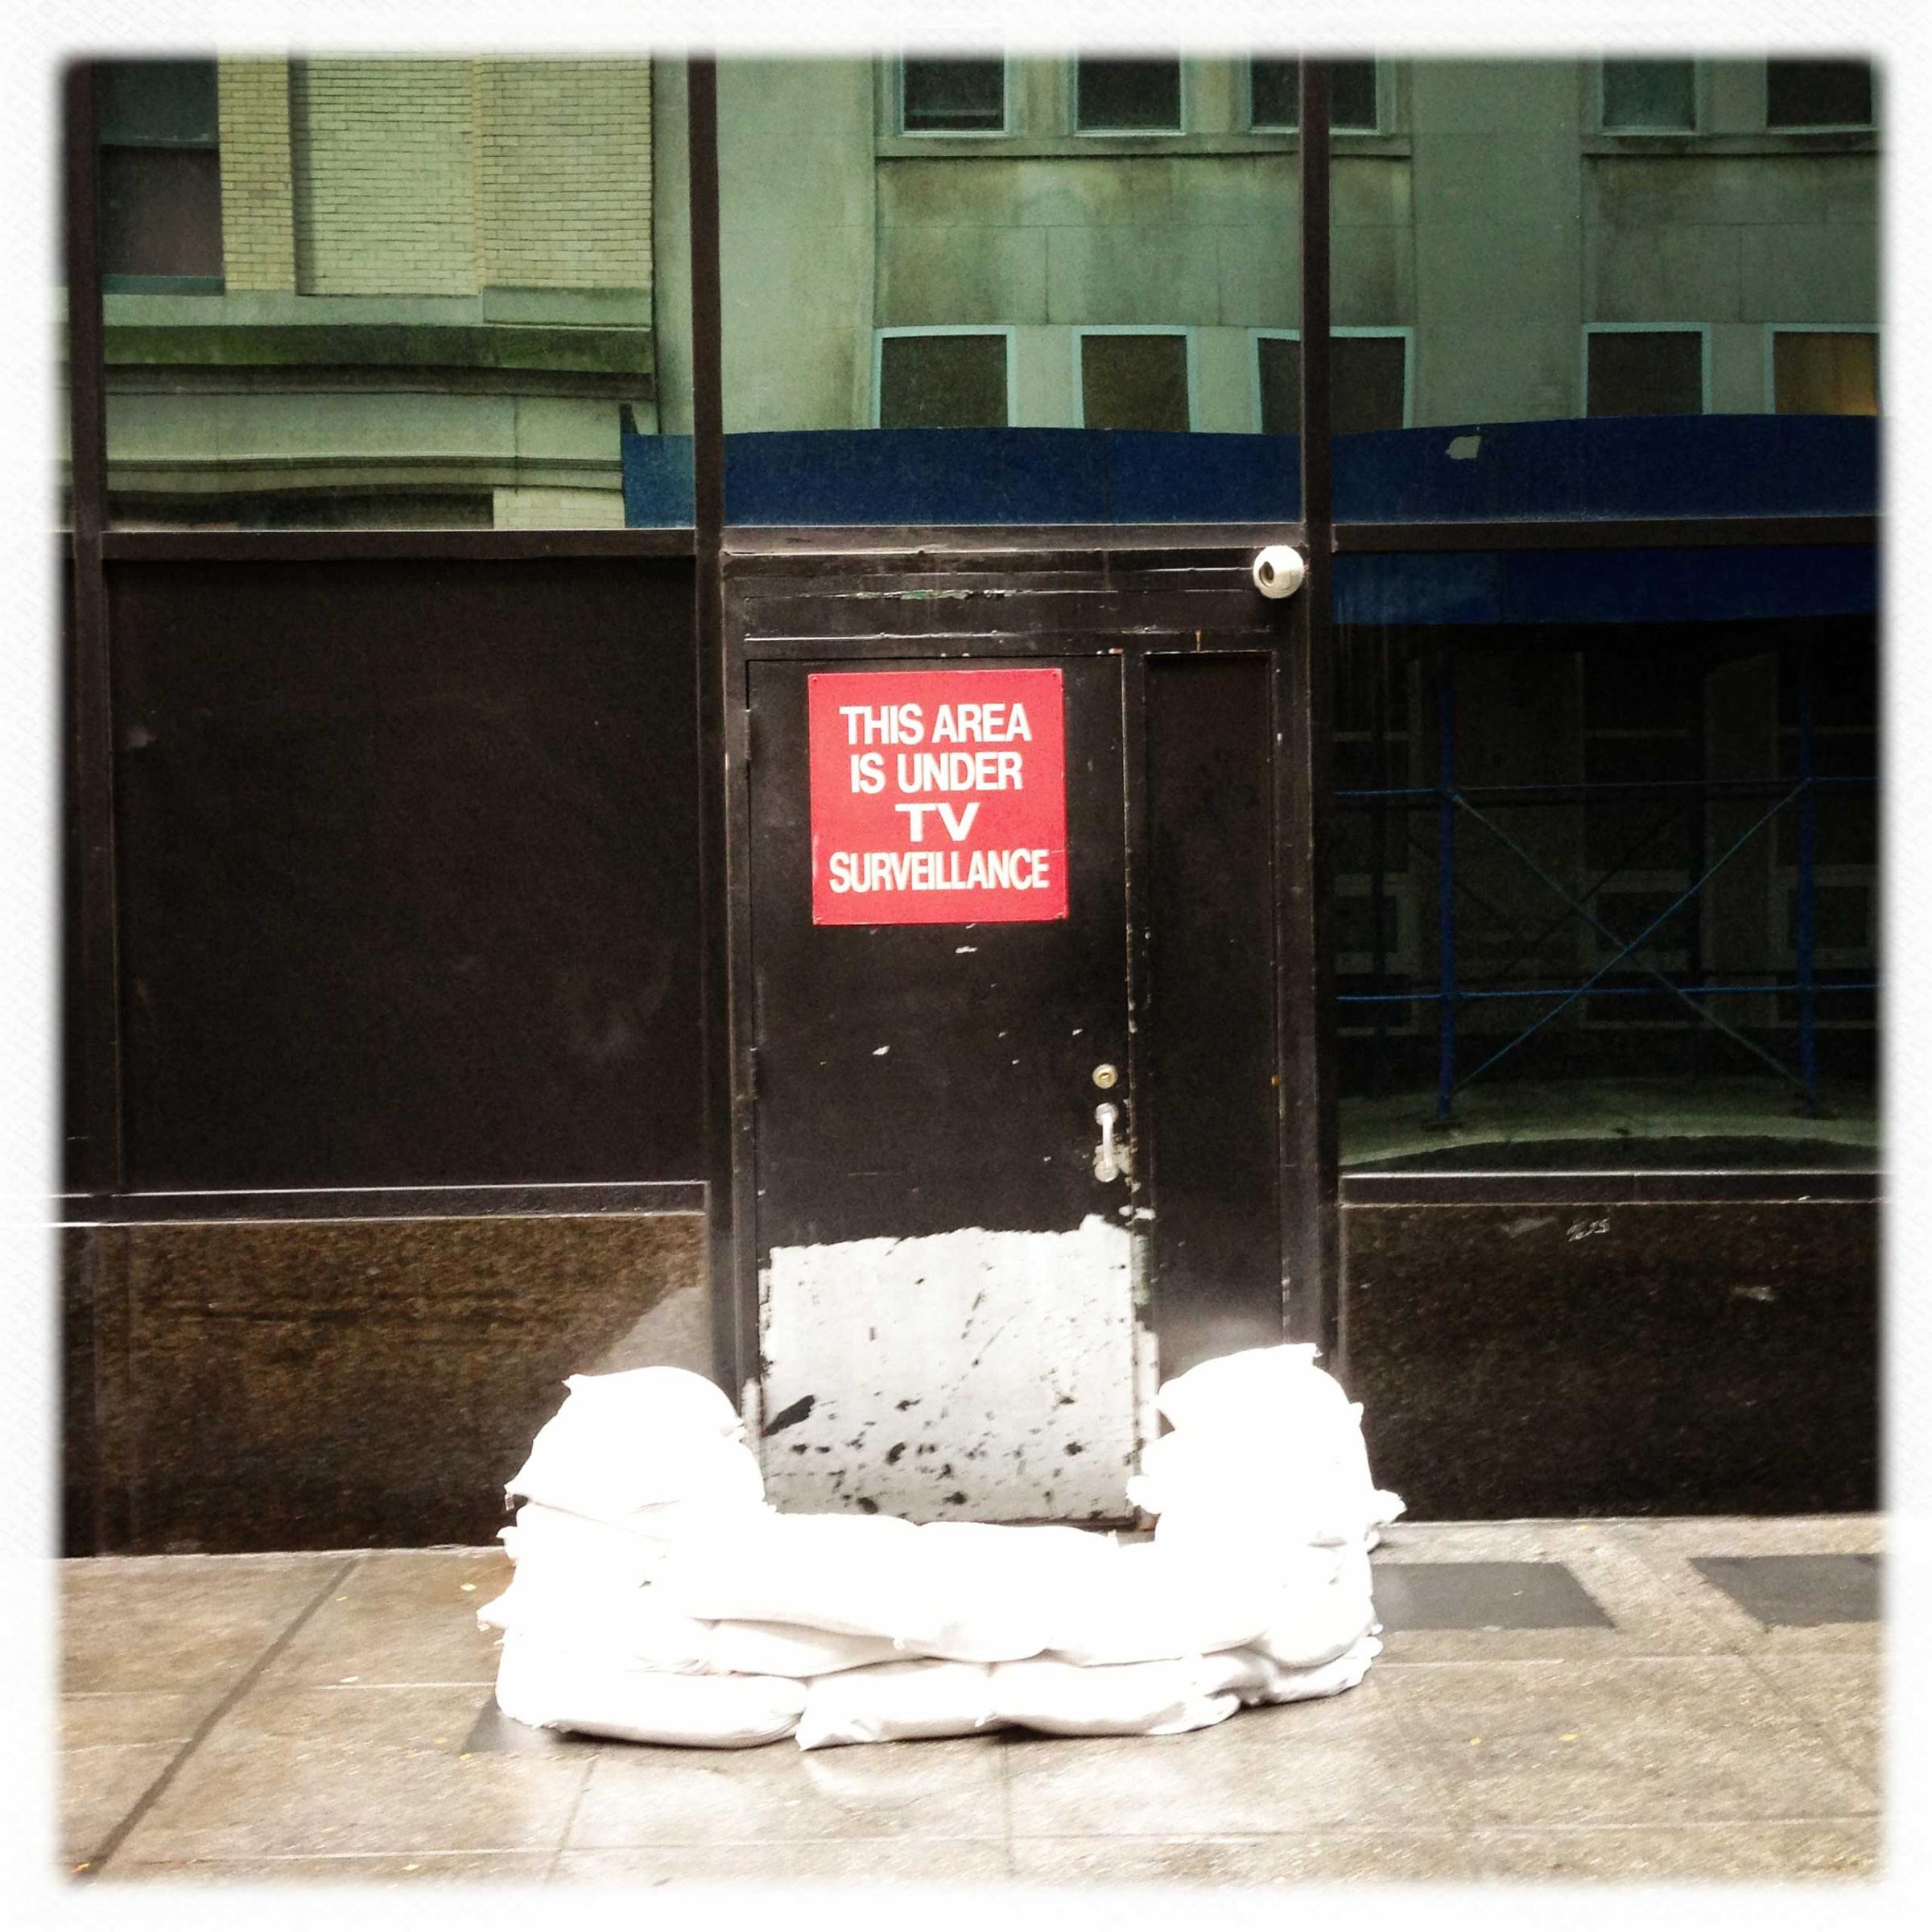 Doors are barricaded with sandbags in New York City